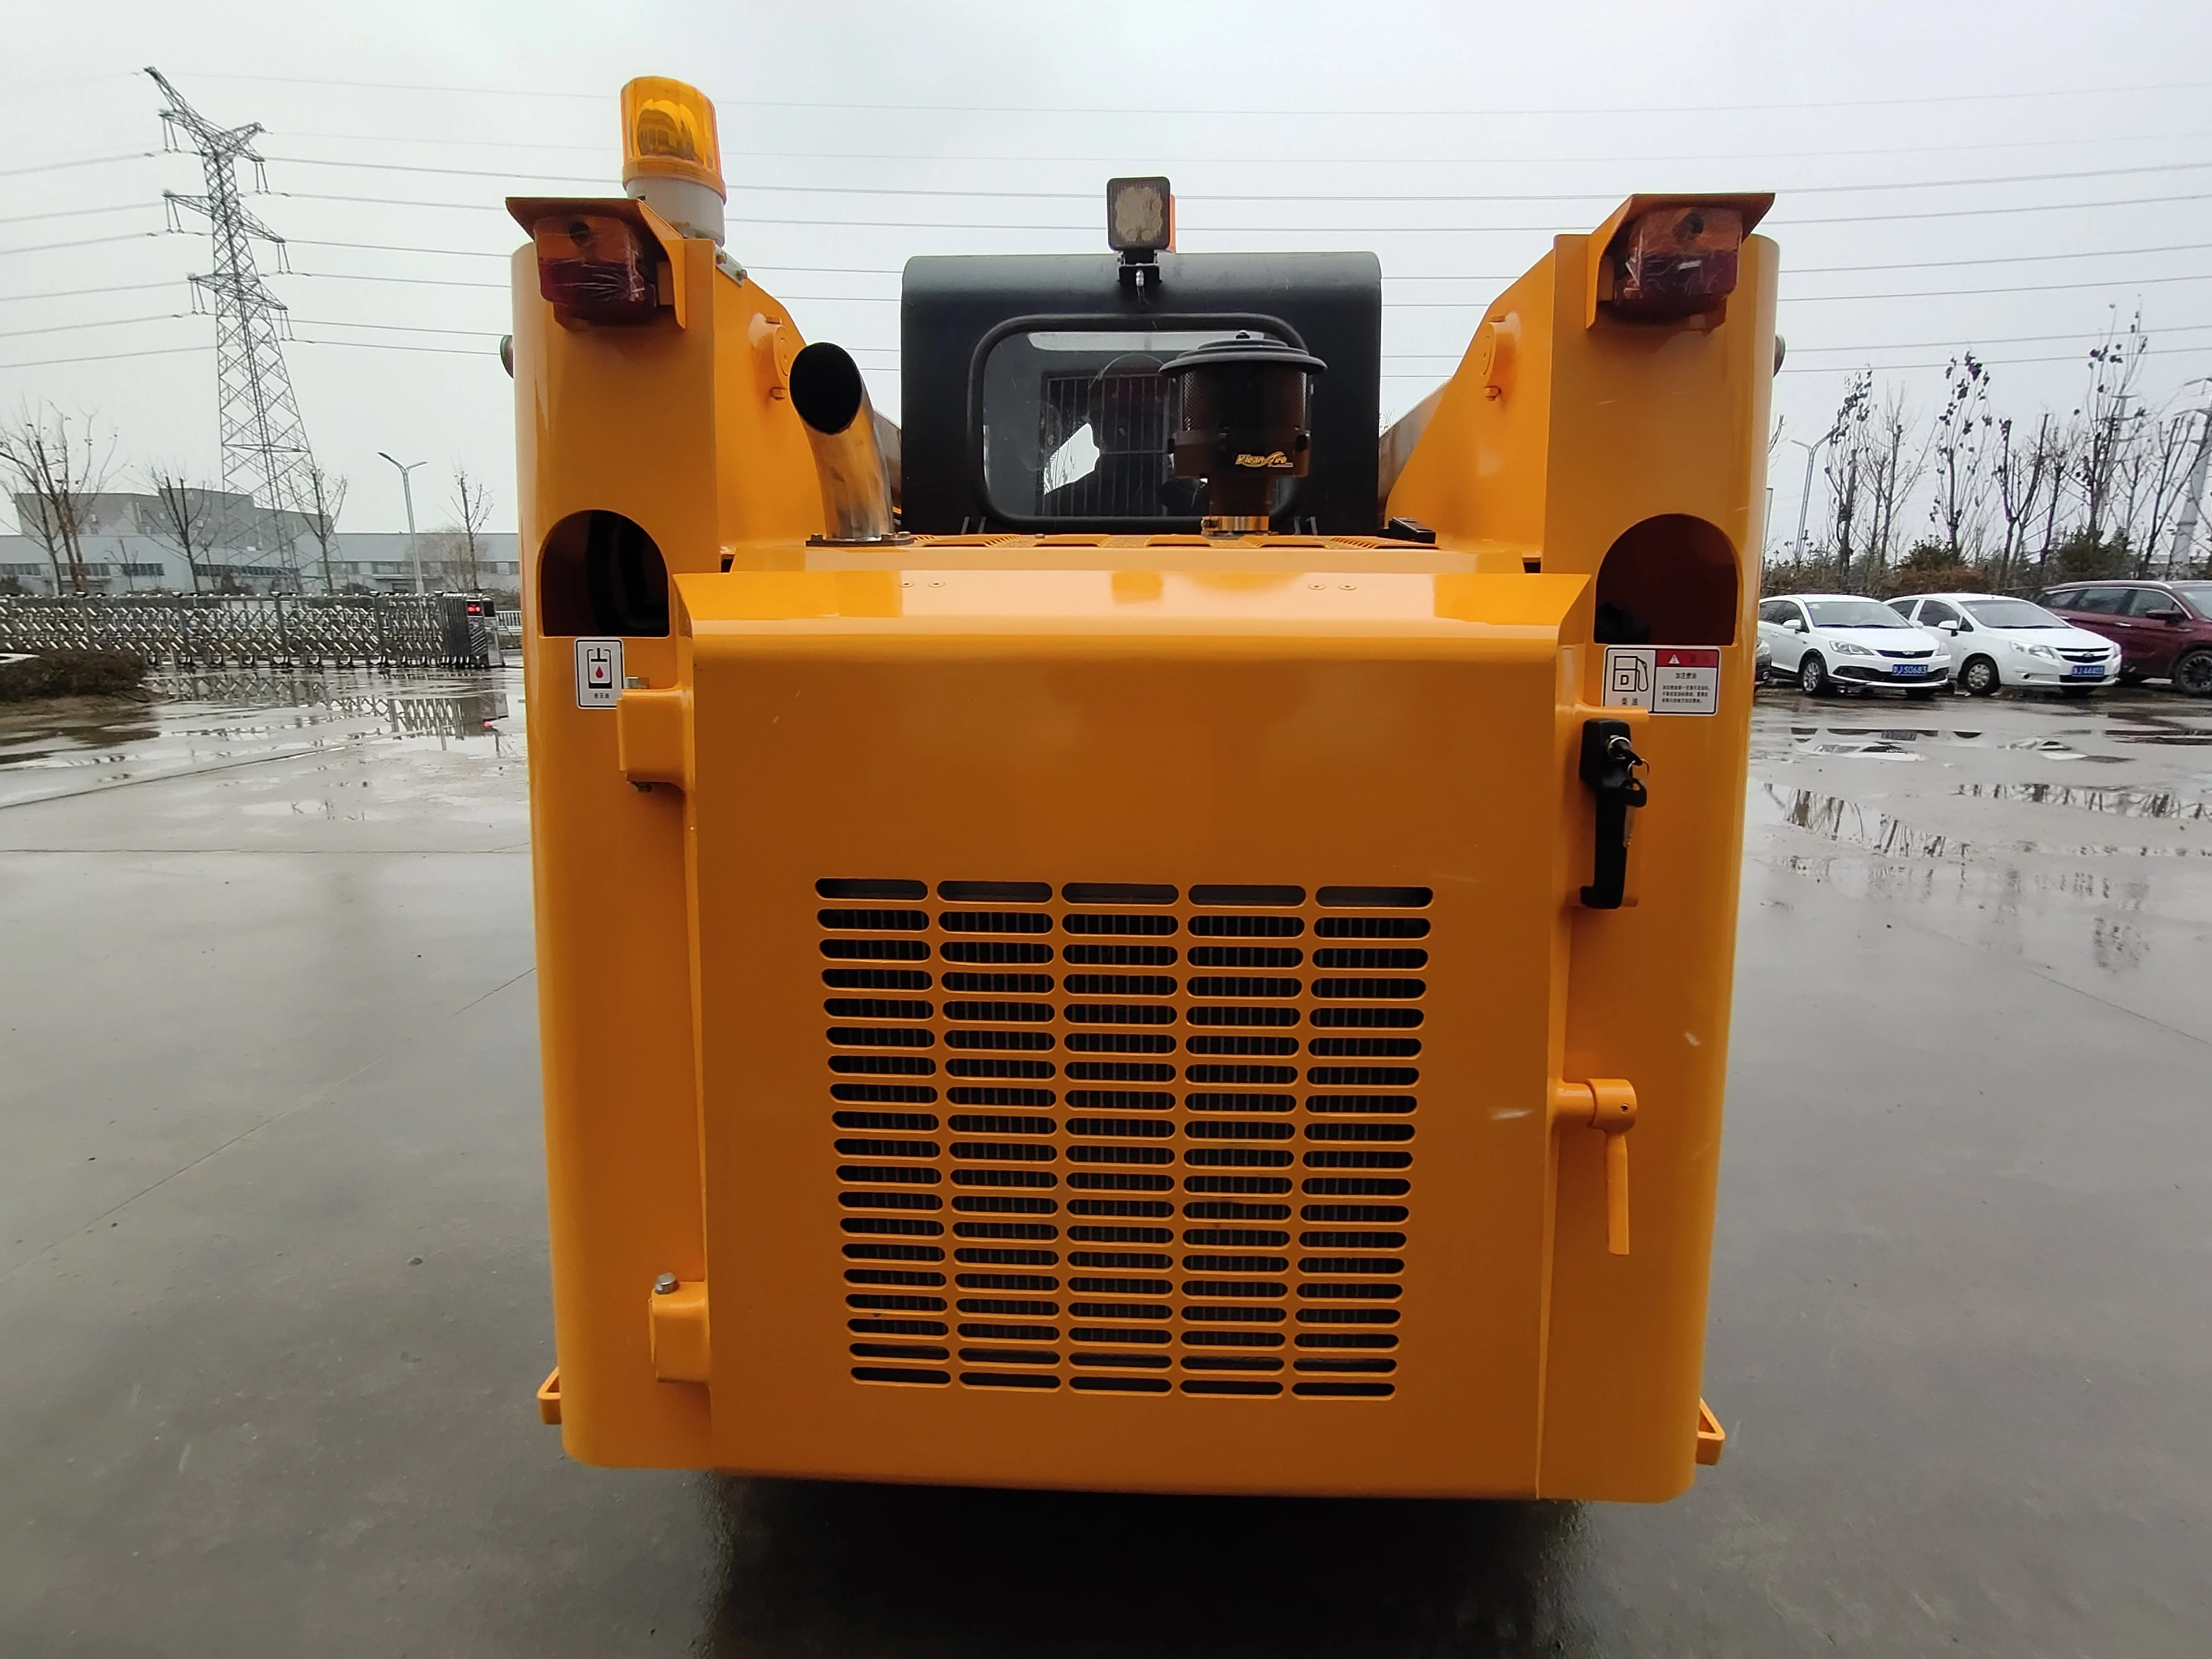 China New Css650 900kg Mini Skid Steer Loader Like Dingo with Ice Breaker Attachment for Sale